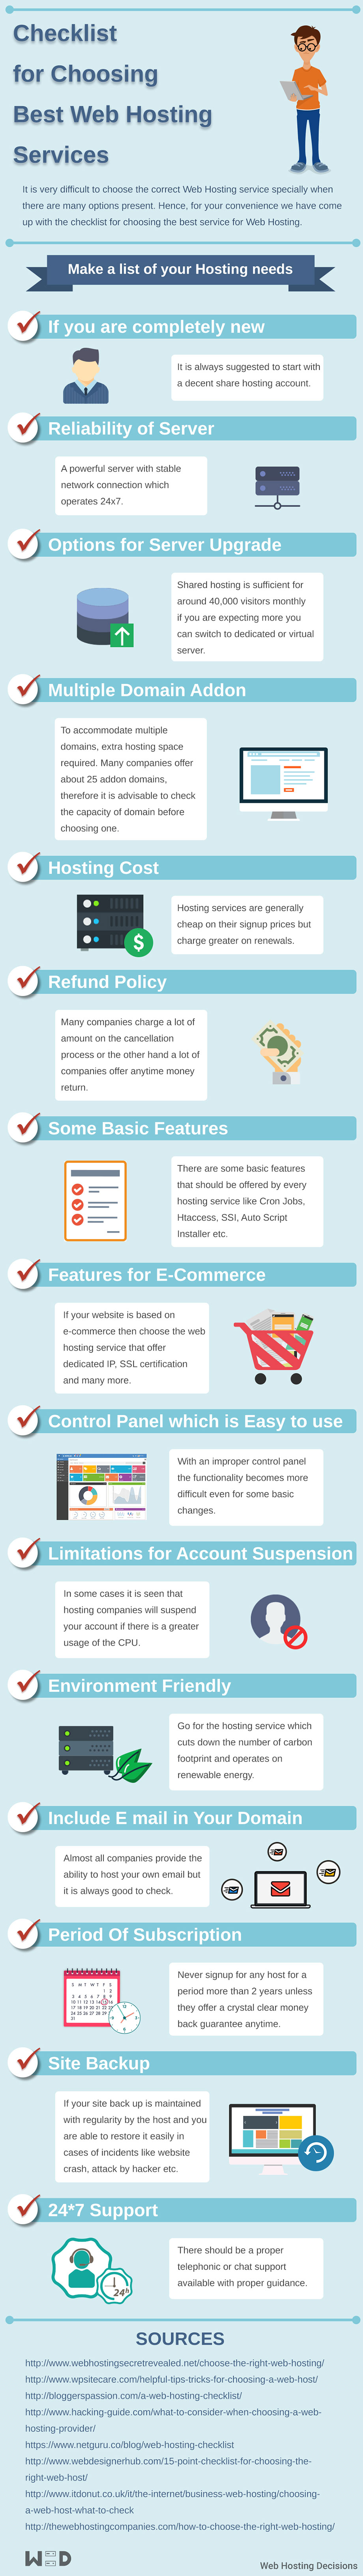 Checklist for Choosing Best Web Hosting Services (Infographic)